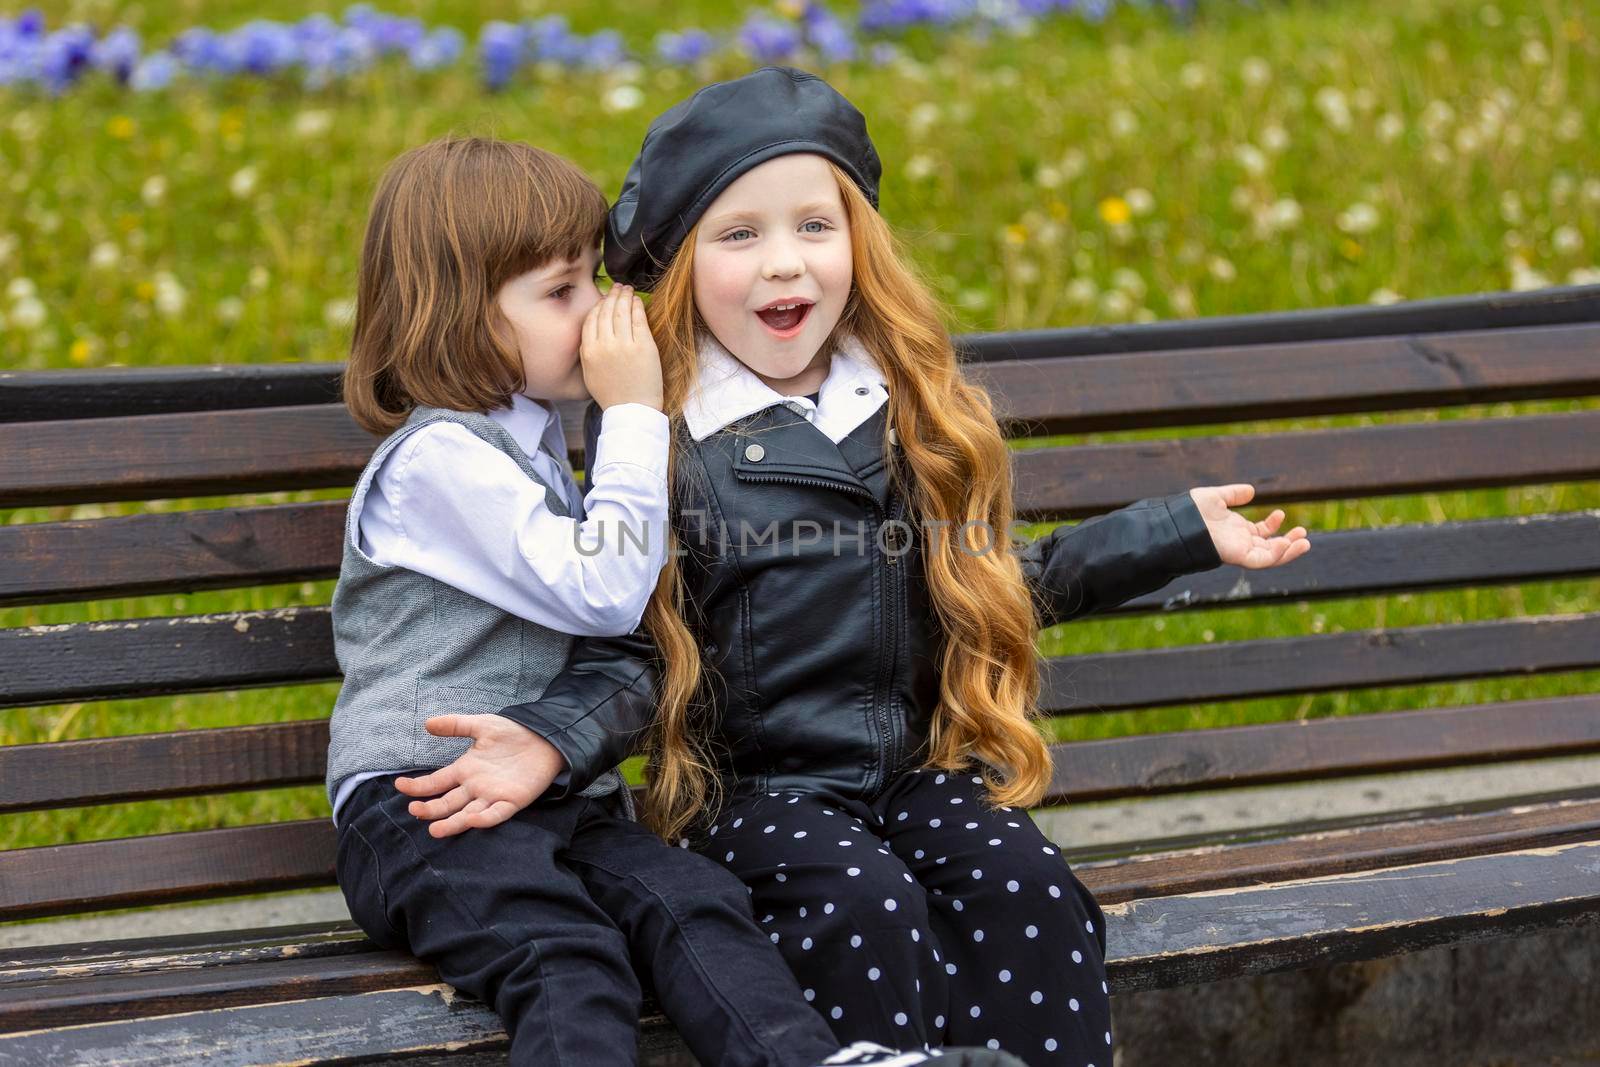 children sit on a bench in the city and talk